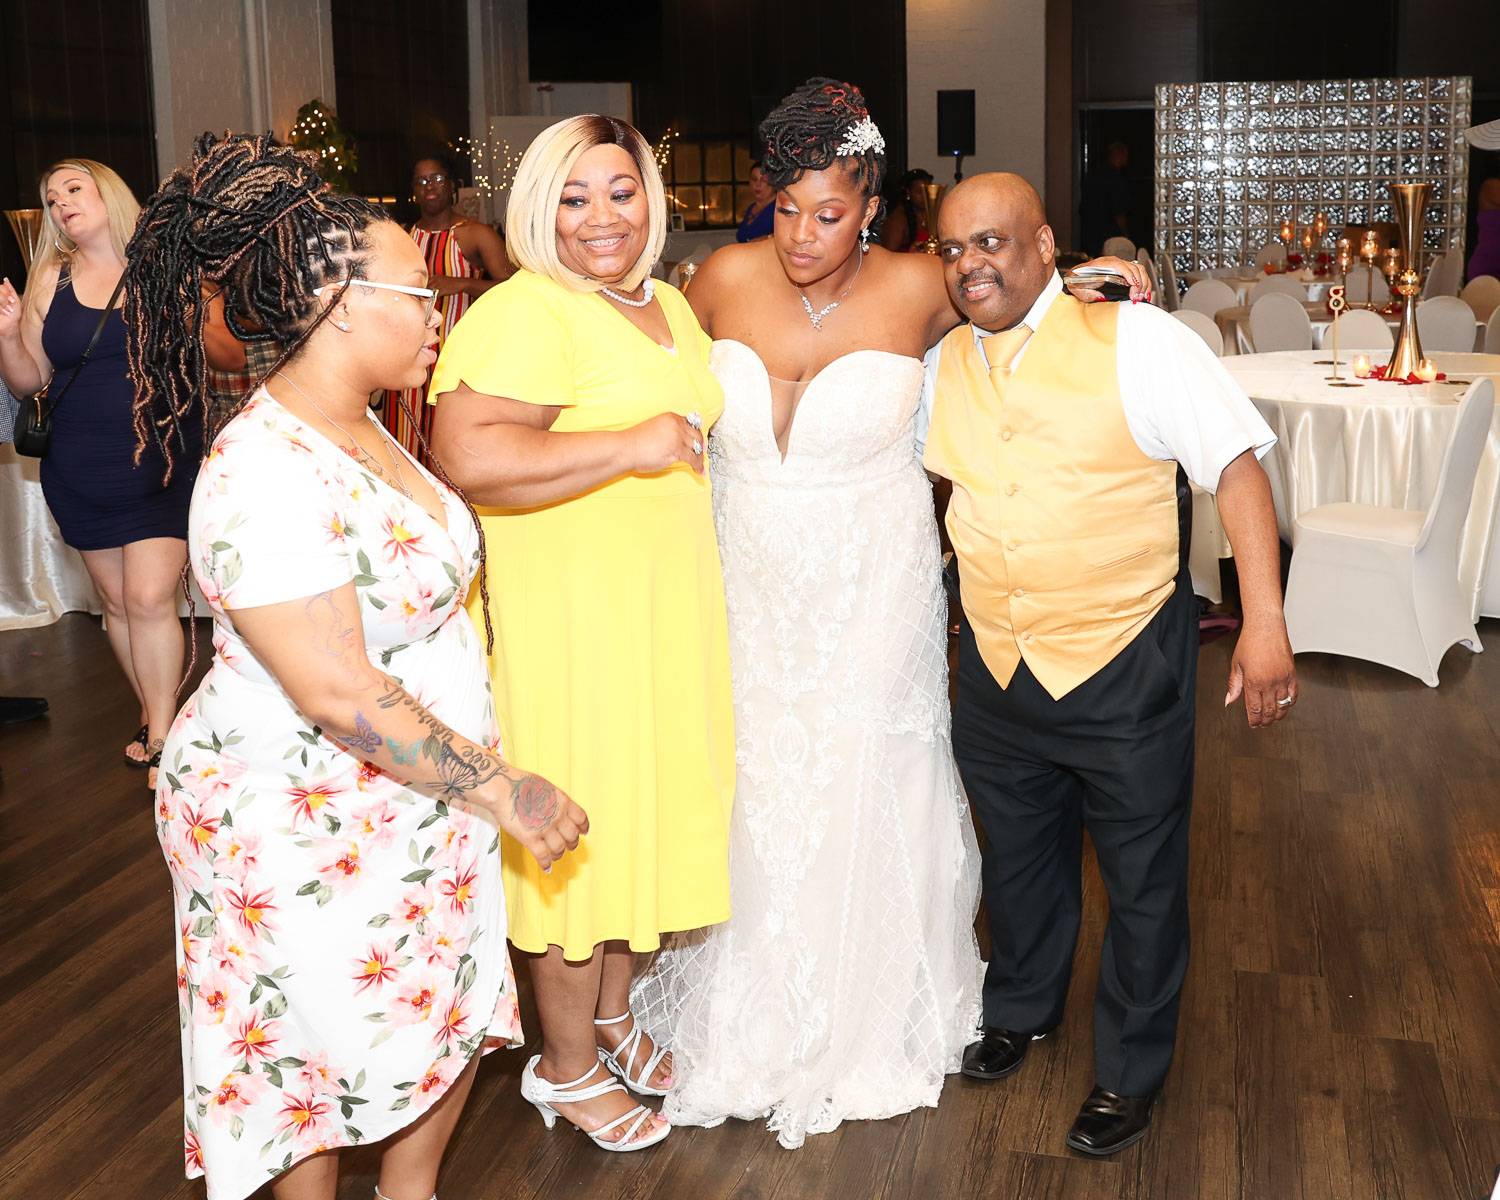 The bride with guests wearing yellow